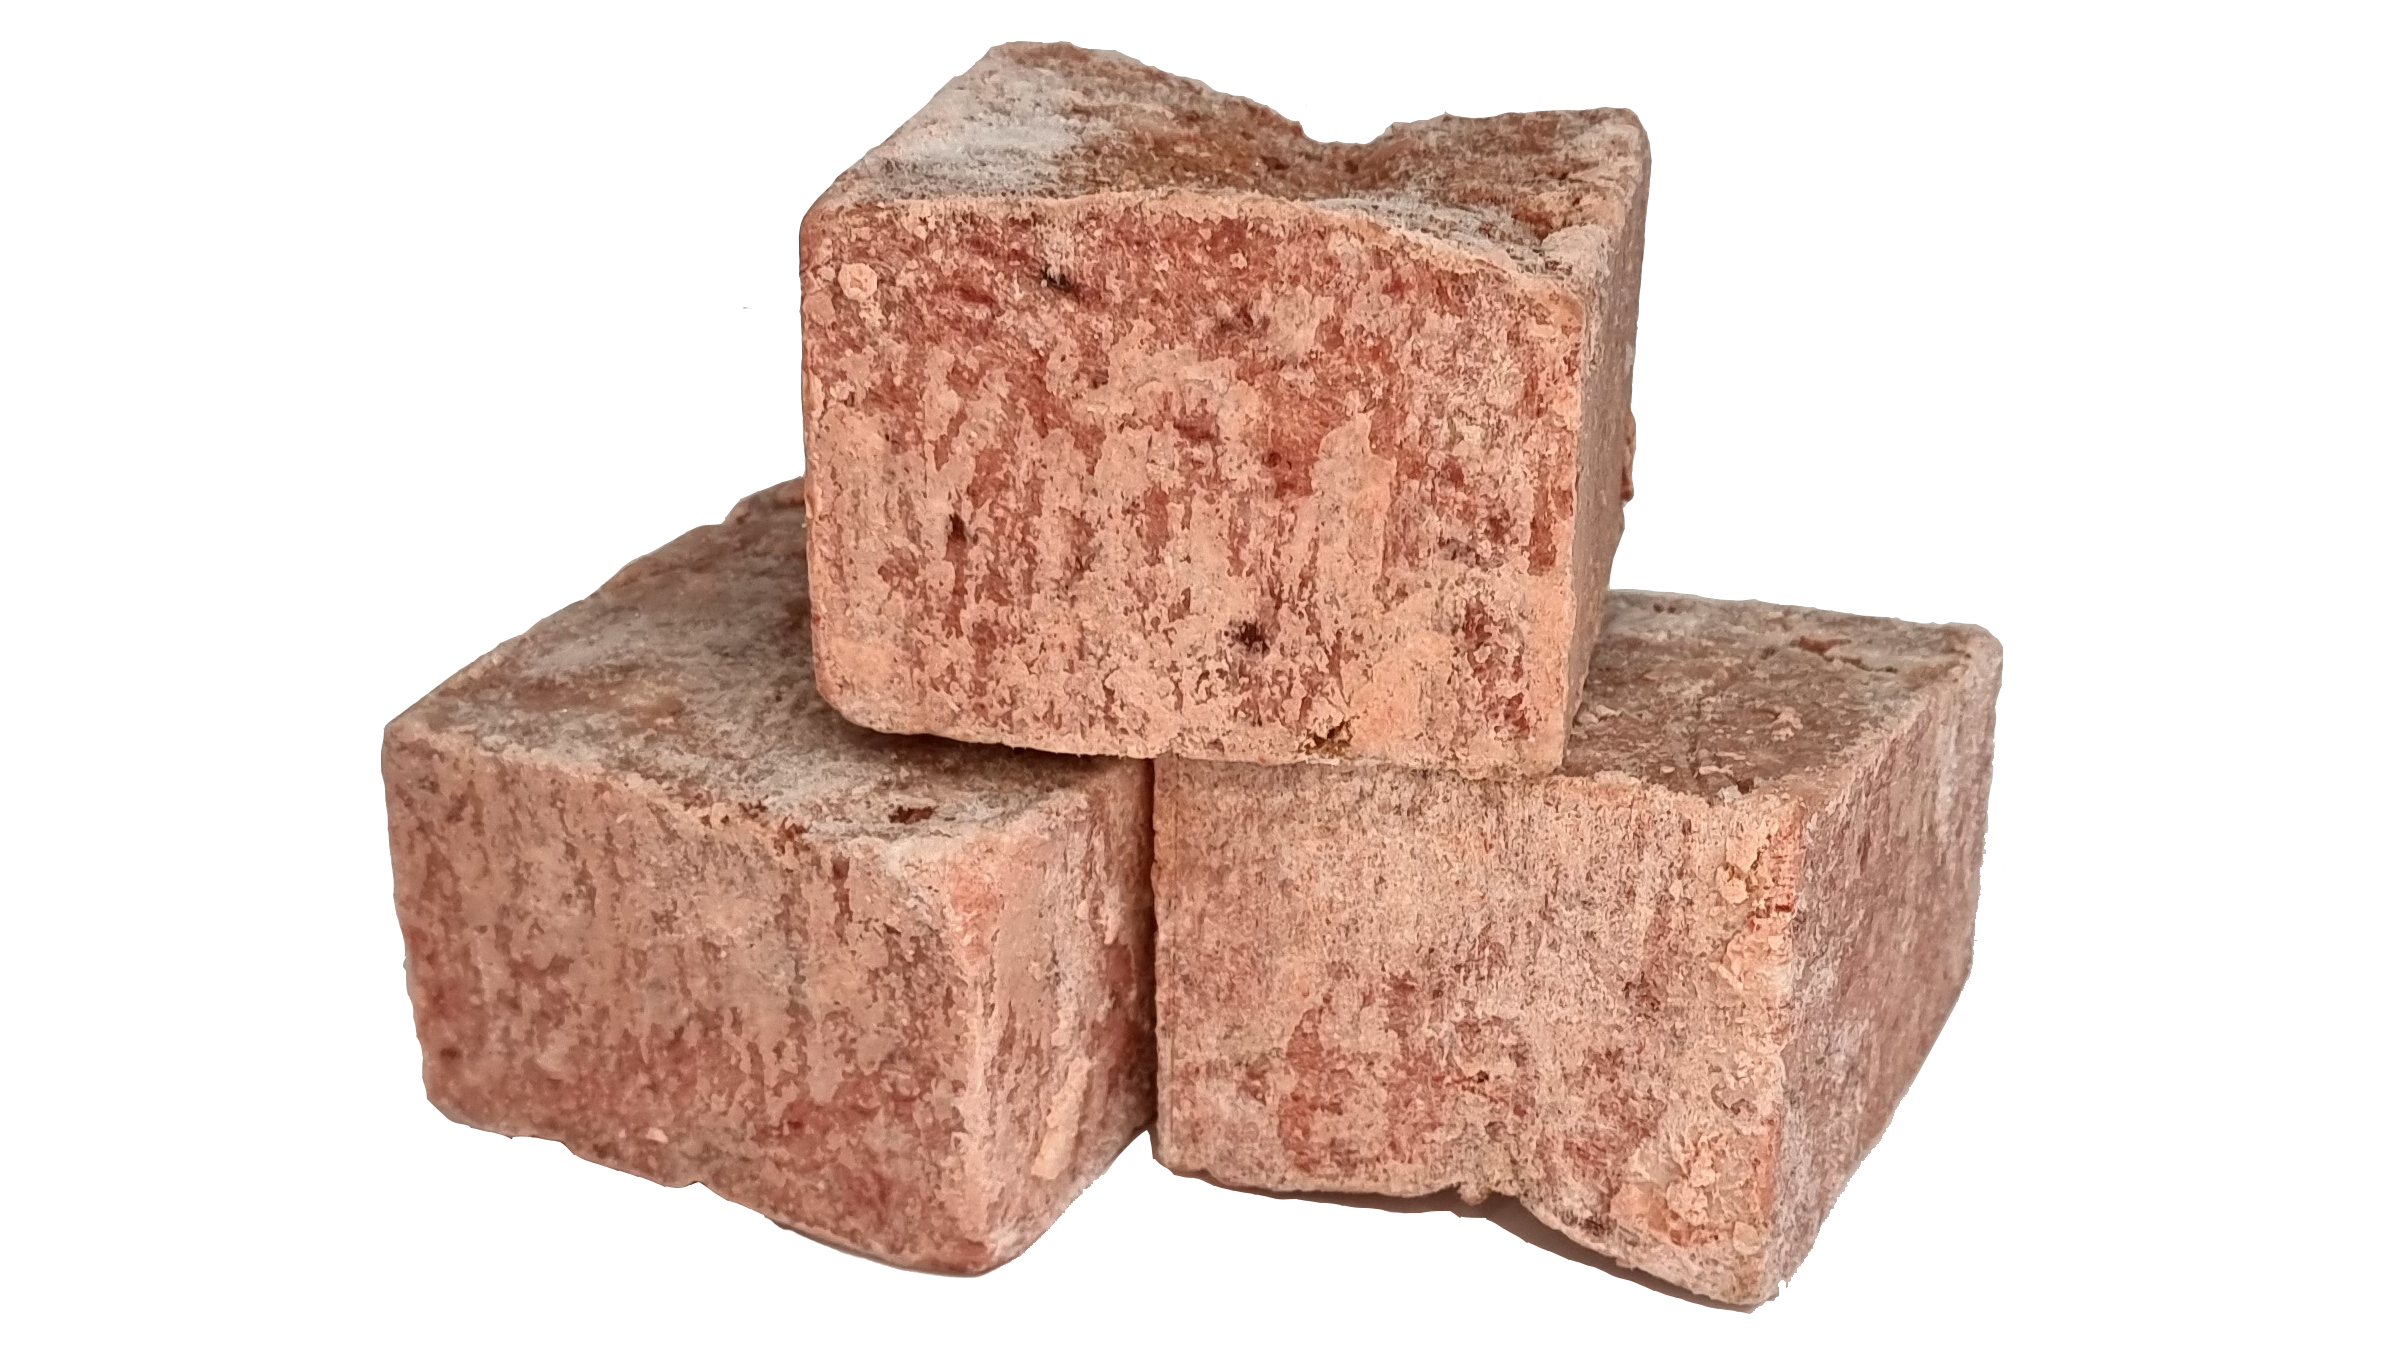 Click & Collect from MALDON - Turkey COMPLETE Mince  - 10 x 1kg  blocks of Raw Frozen Mince